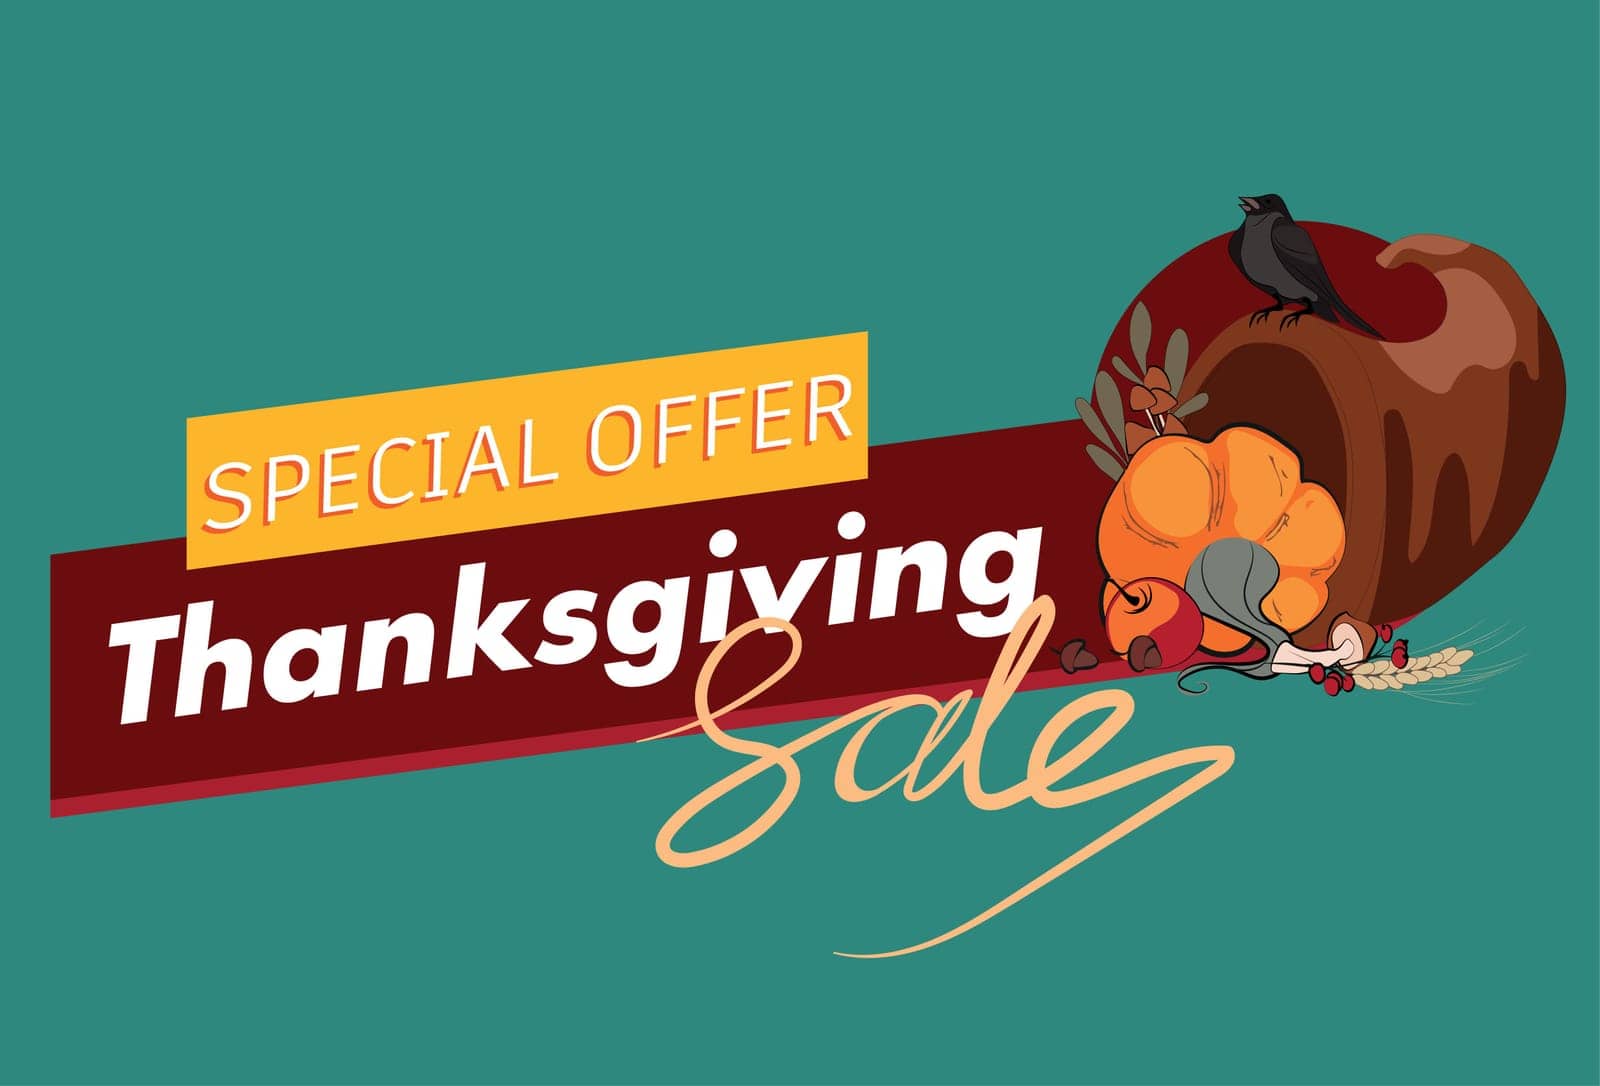 Thanksgiving holiday design template for websites by milastokerpro